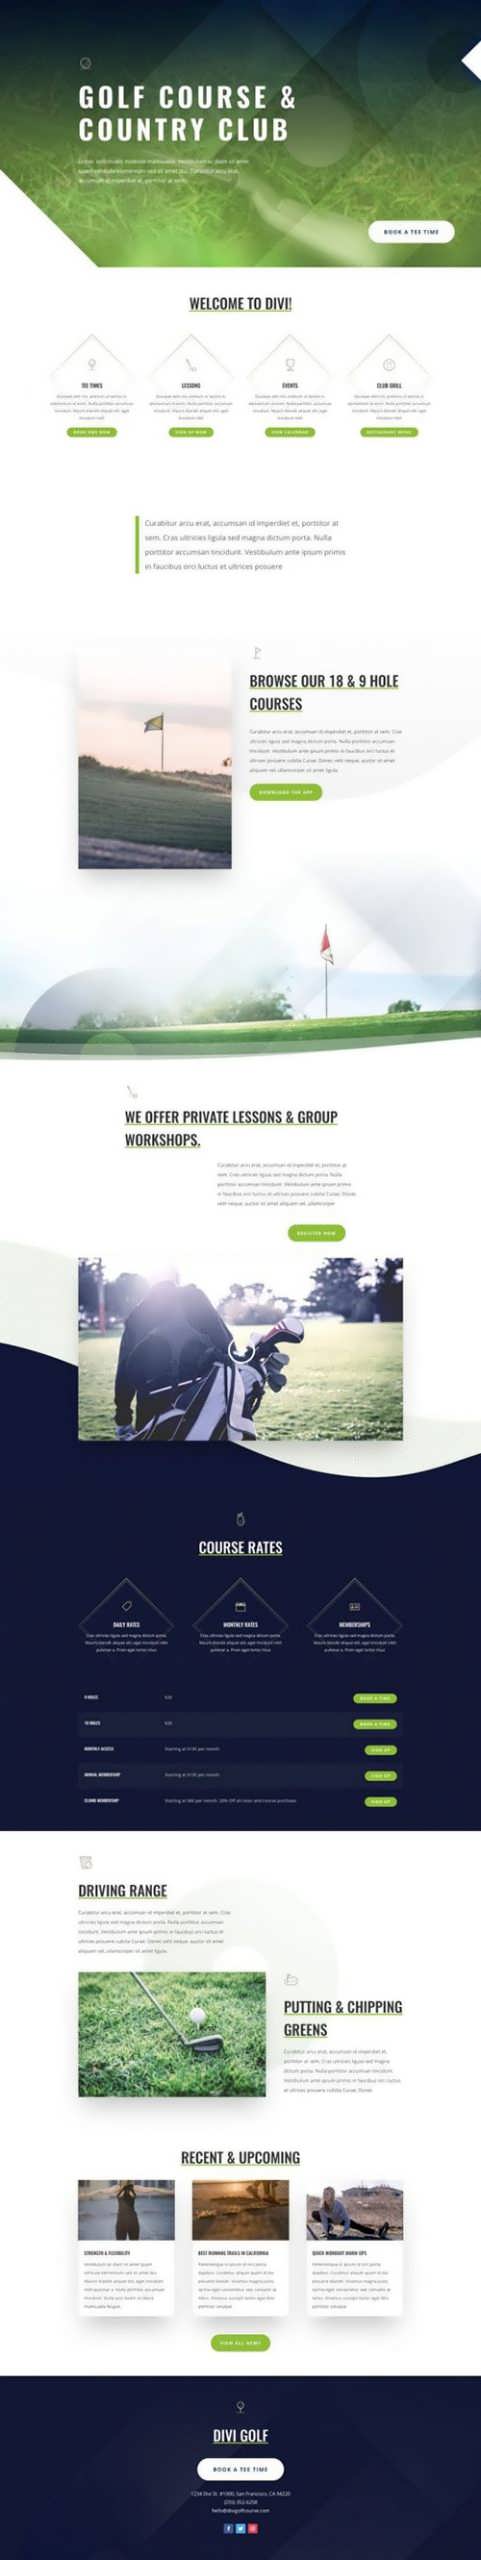 golf course landing page scaled